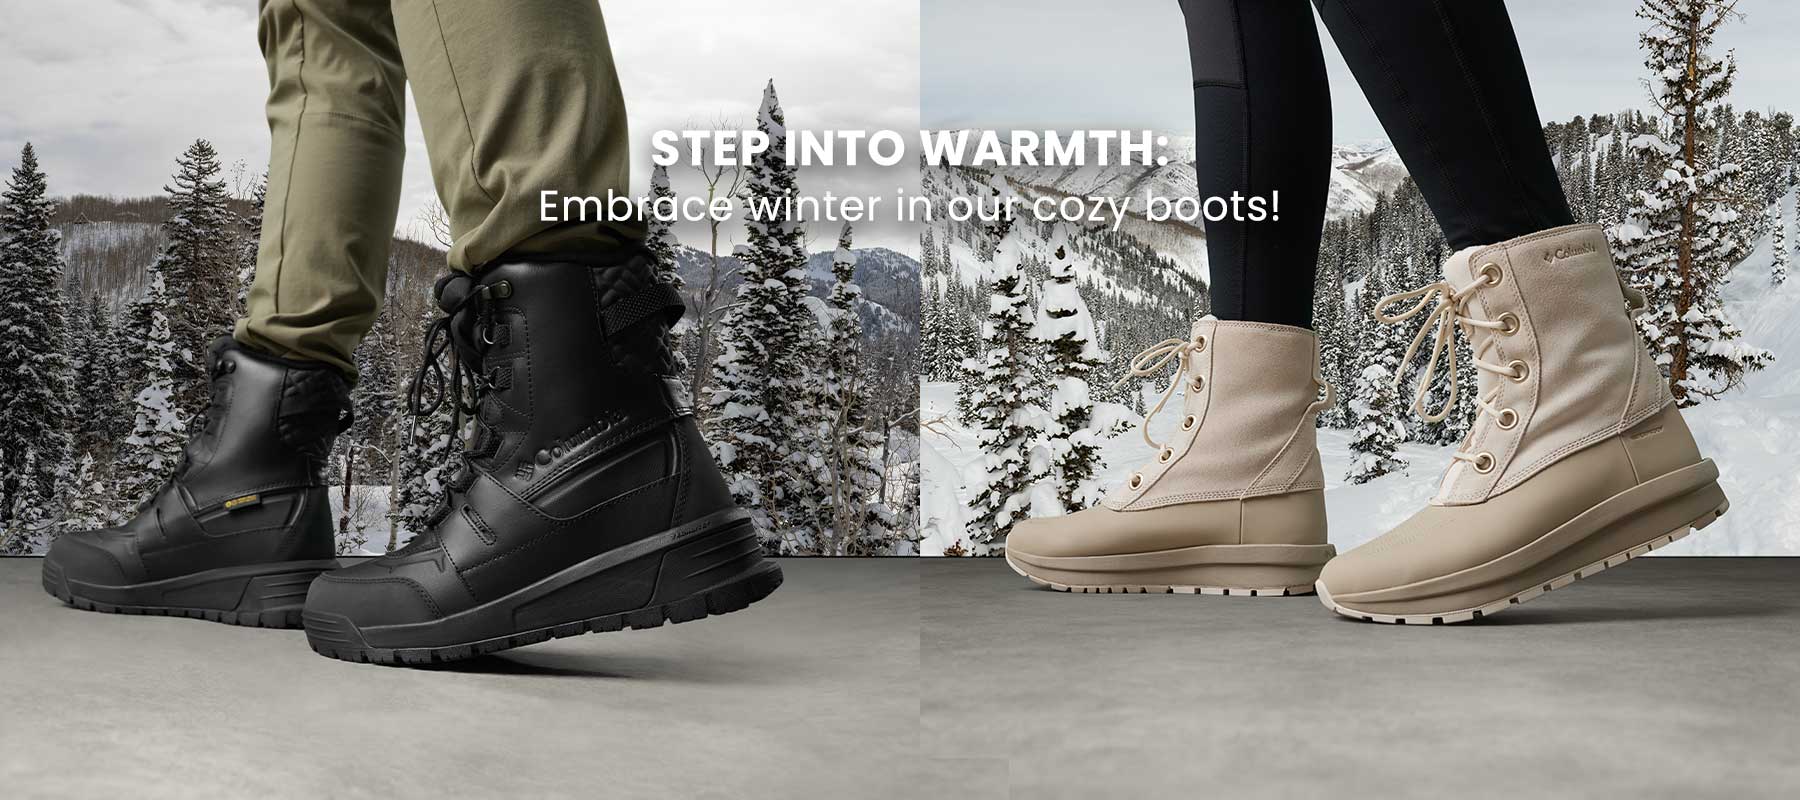 Step into warmth: Embrace winter in our cozy boots!